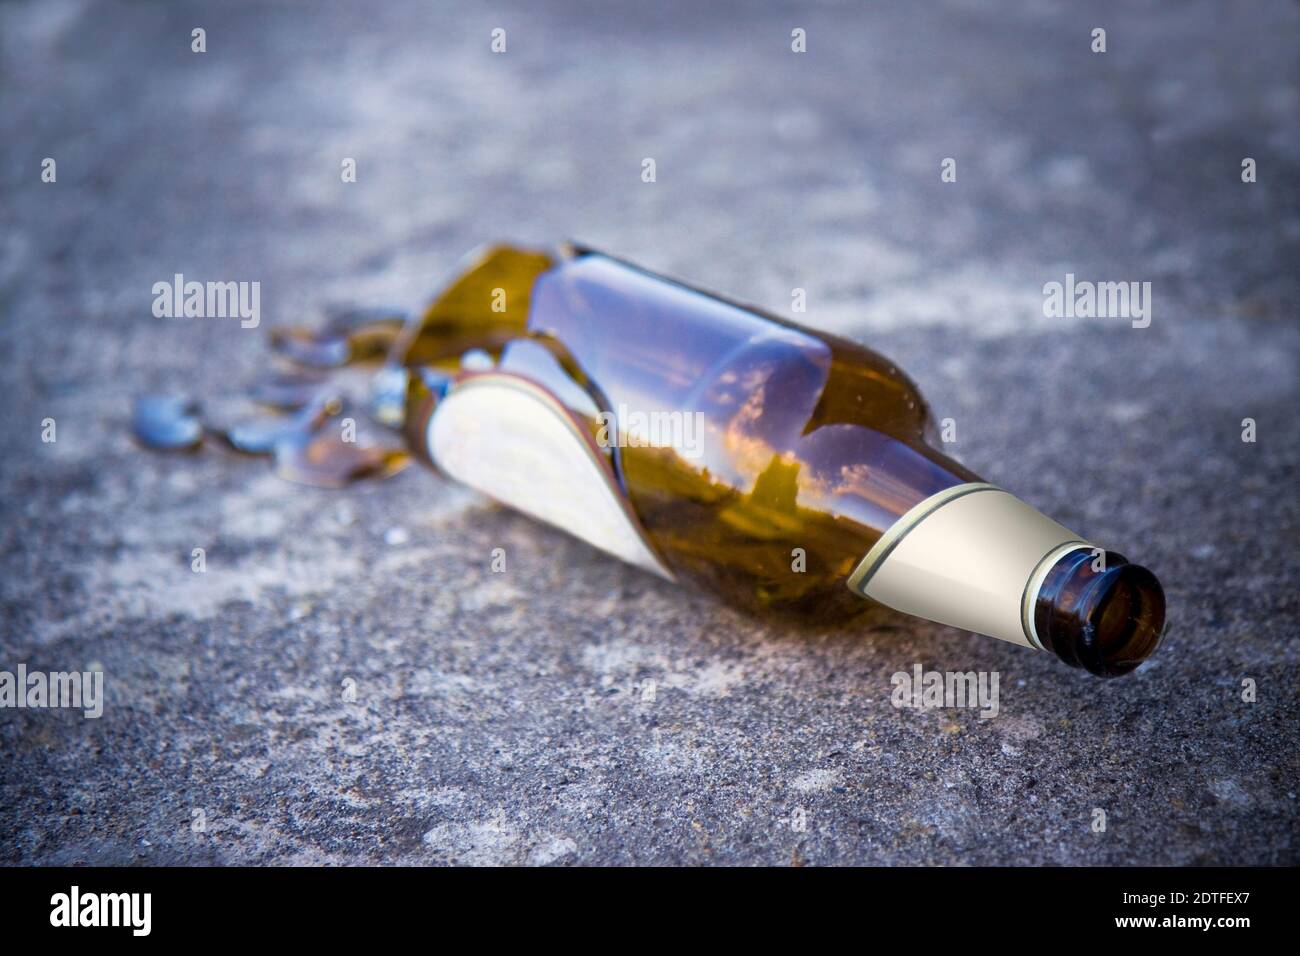 Close-up Of Broken Beer Bottle On Ground Stock Photo - Alamy